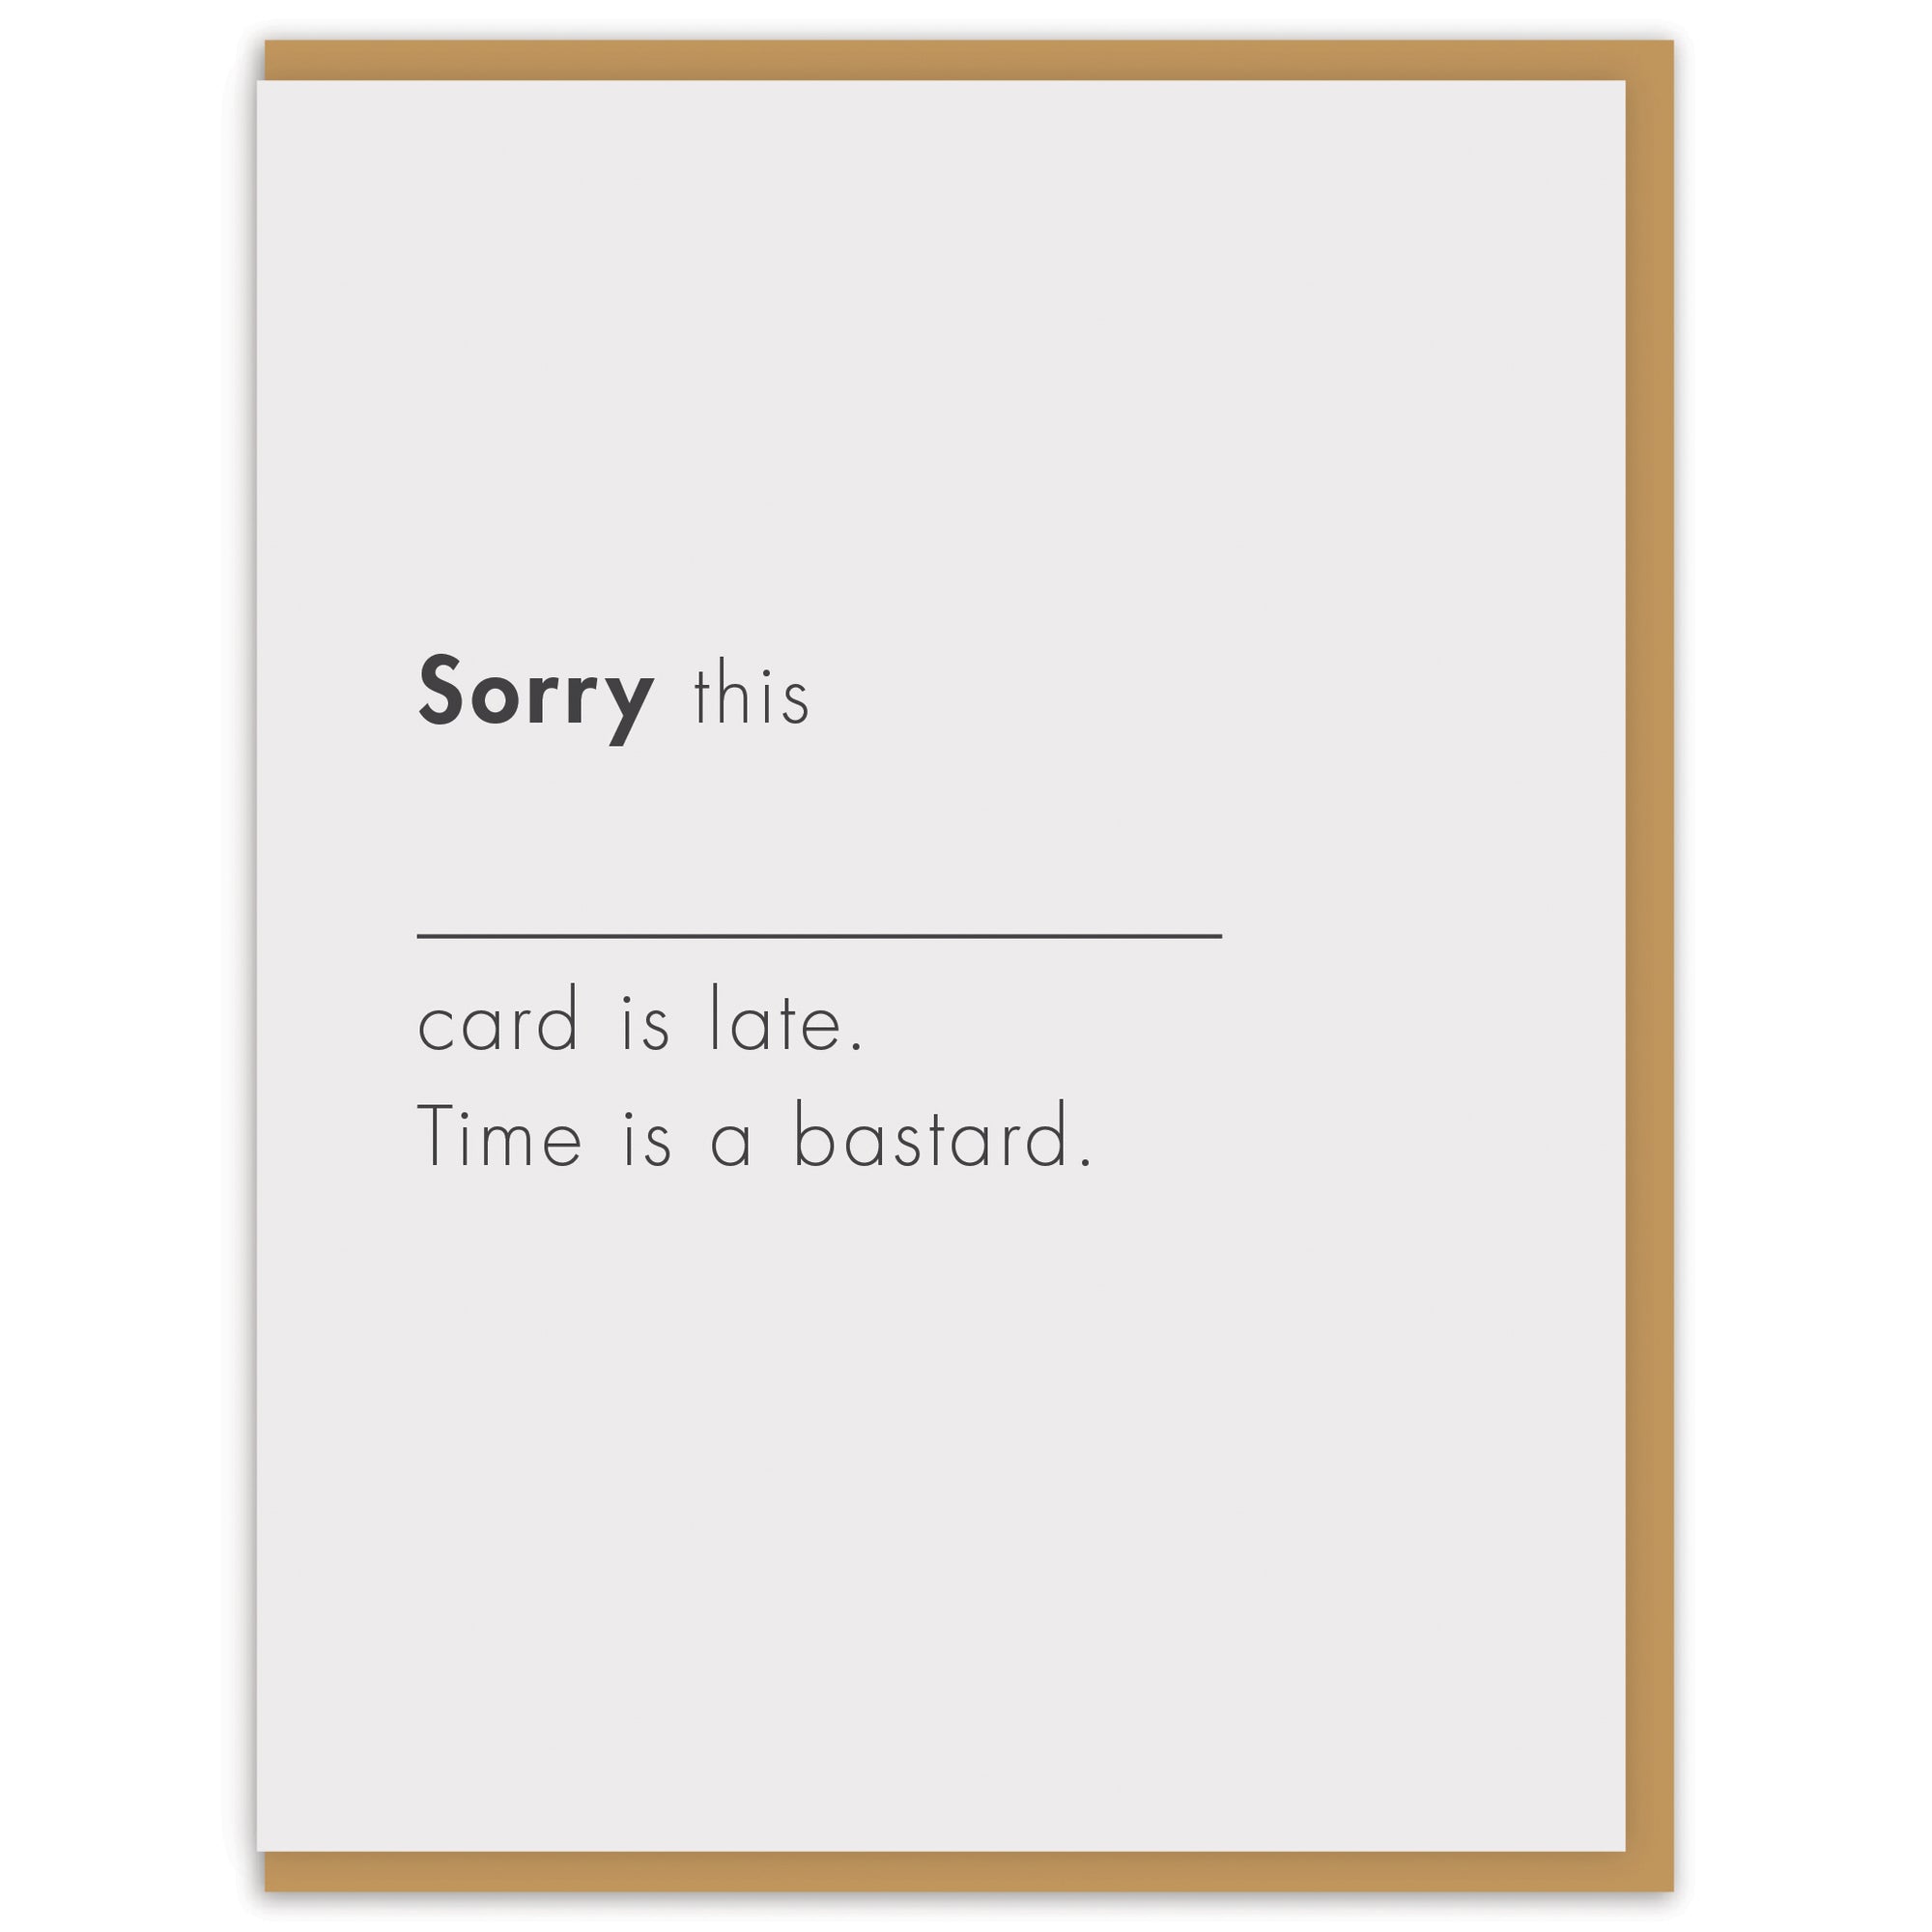 Sorry this card is late.